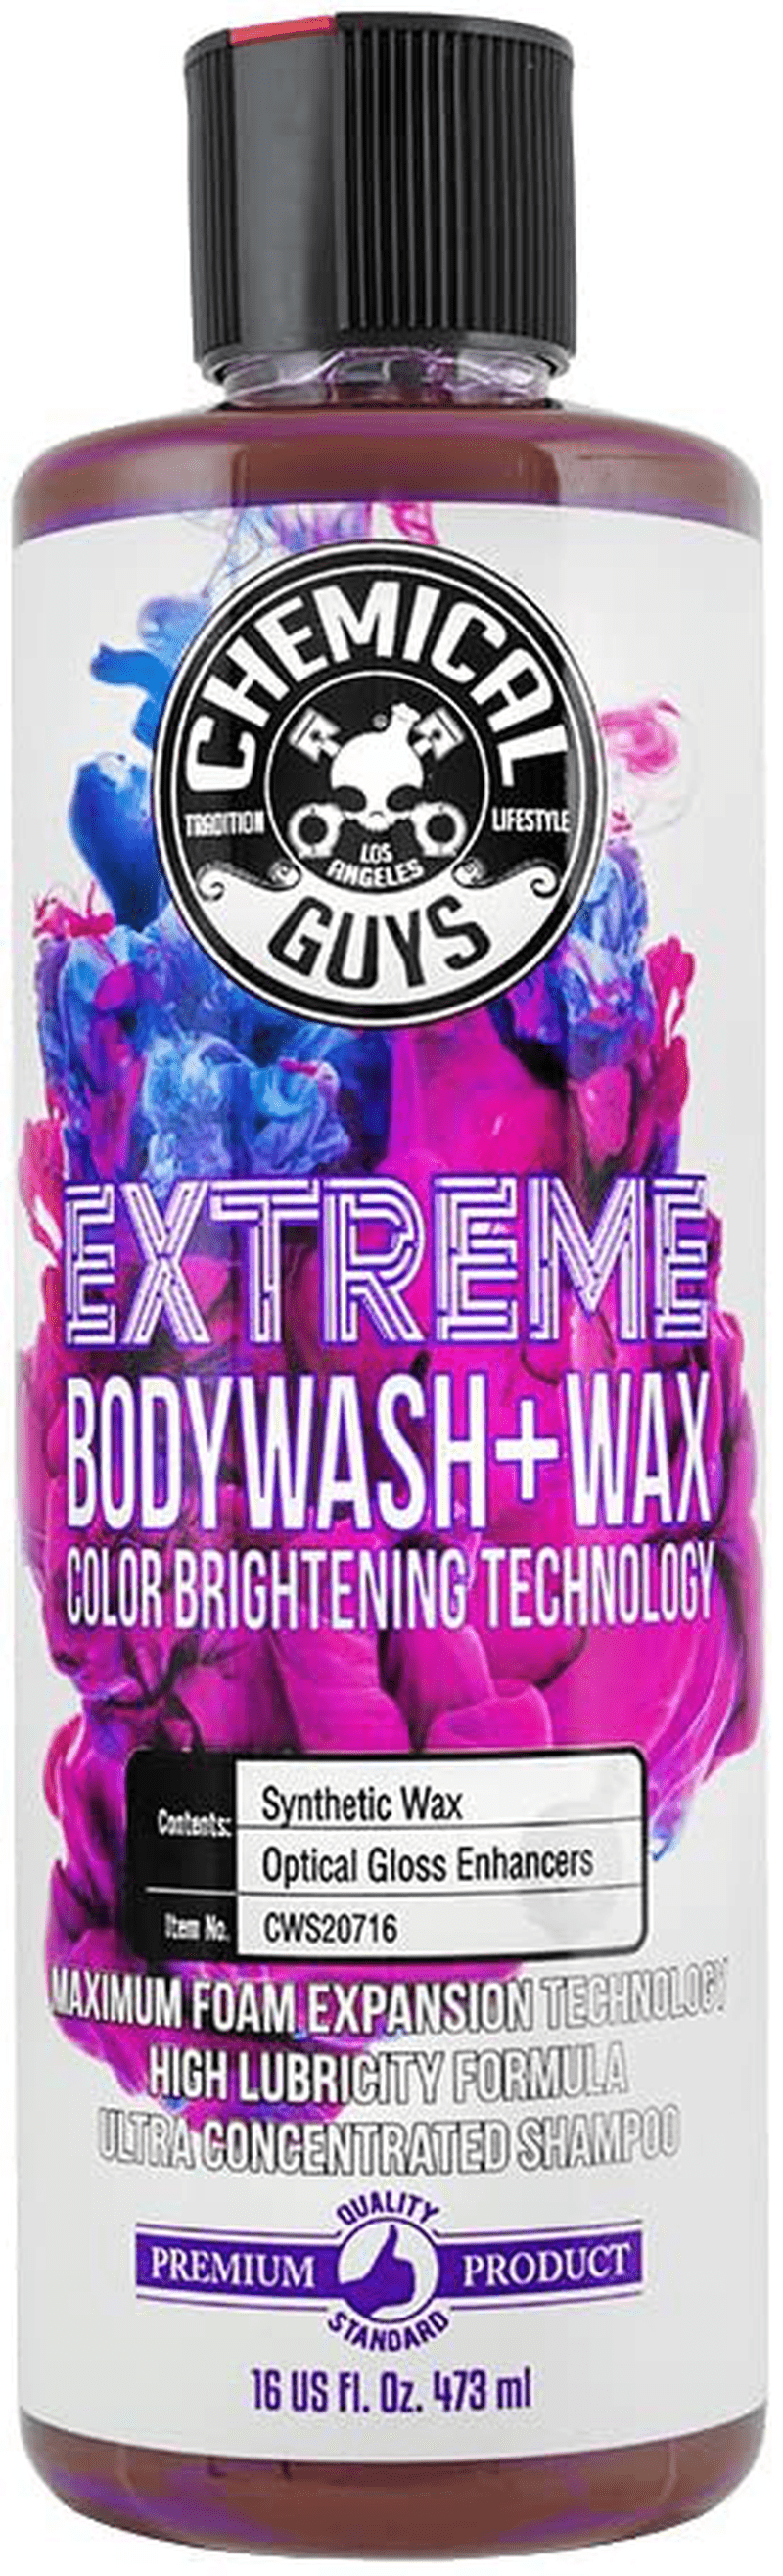 Chemical Guys CWS20764 Extreme Bodywash & Wax Foaming Car Wash Soap (Works with Foam Cannons, Foam Guns or Bucket Washes), 64 oz., Grape Scent